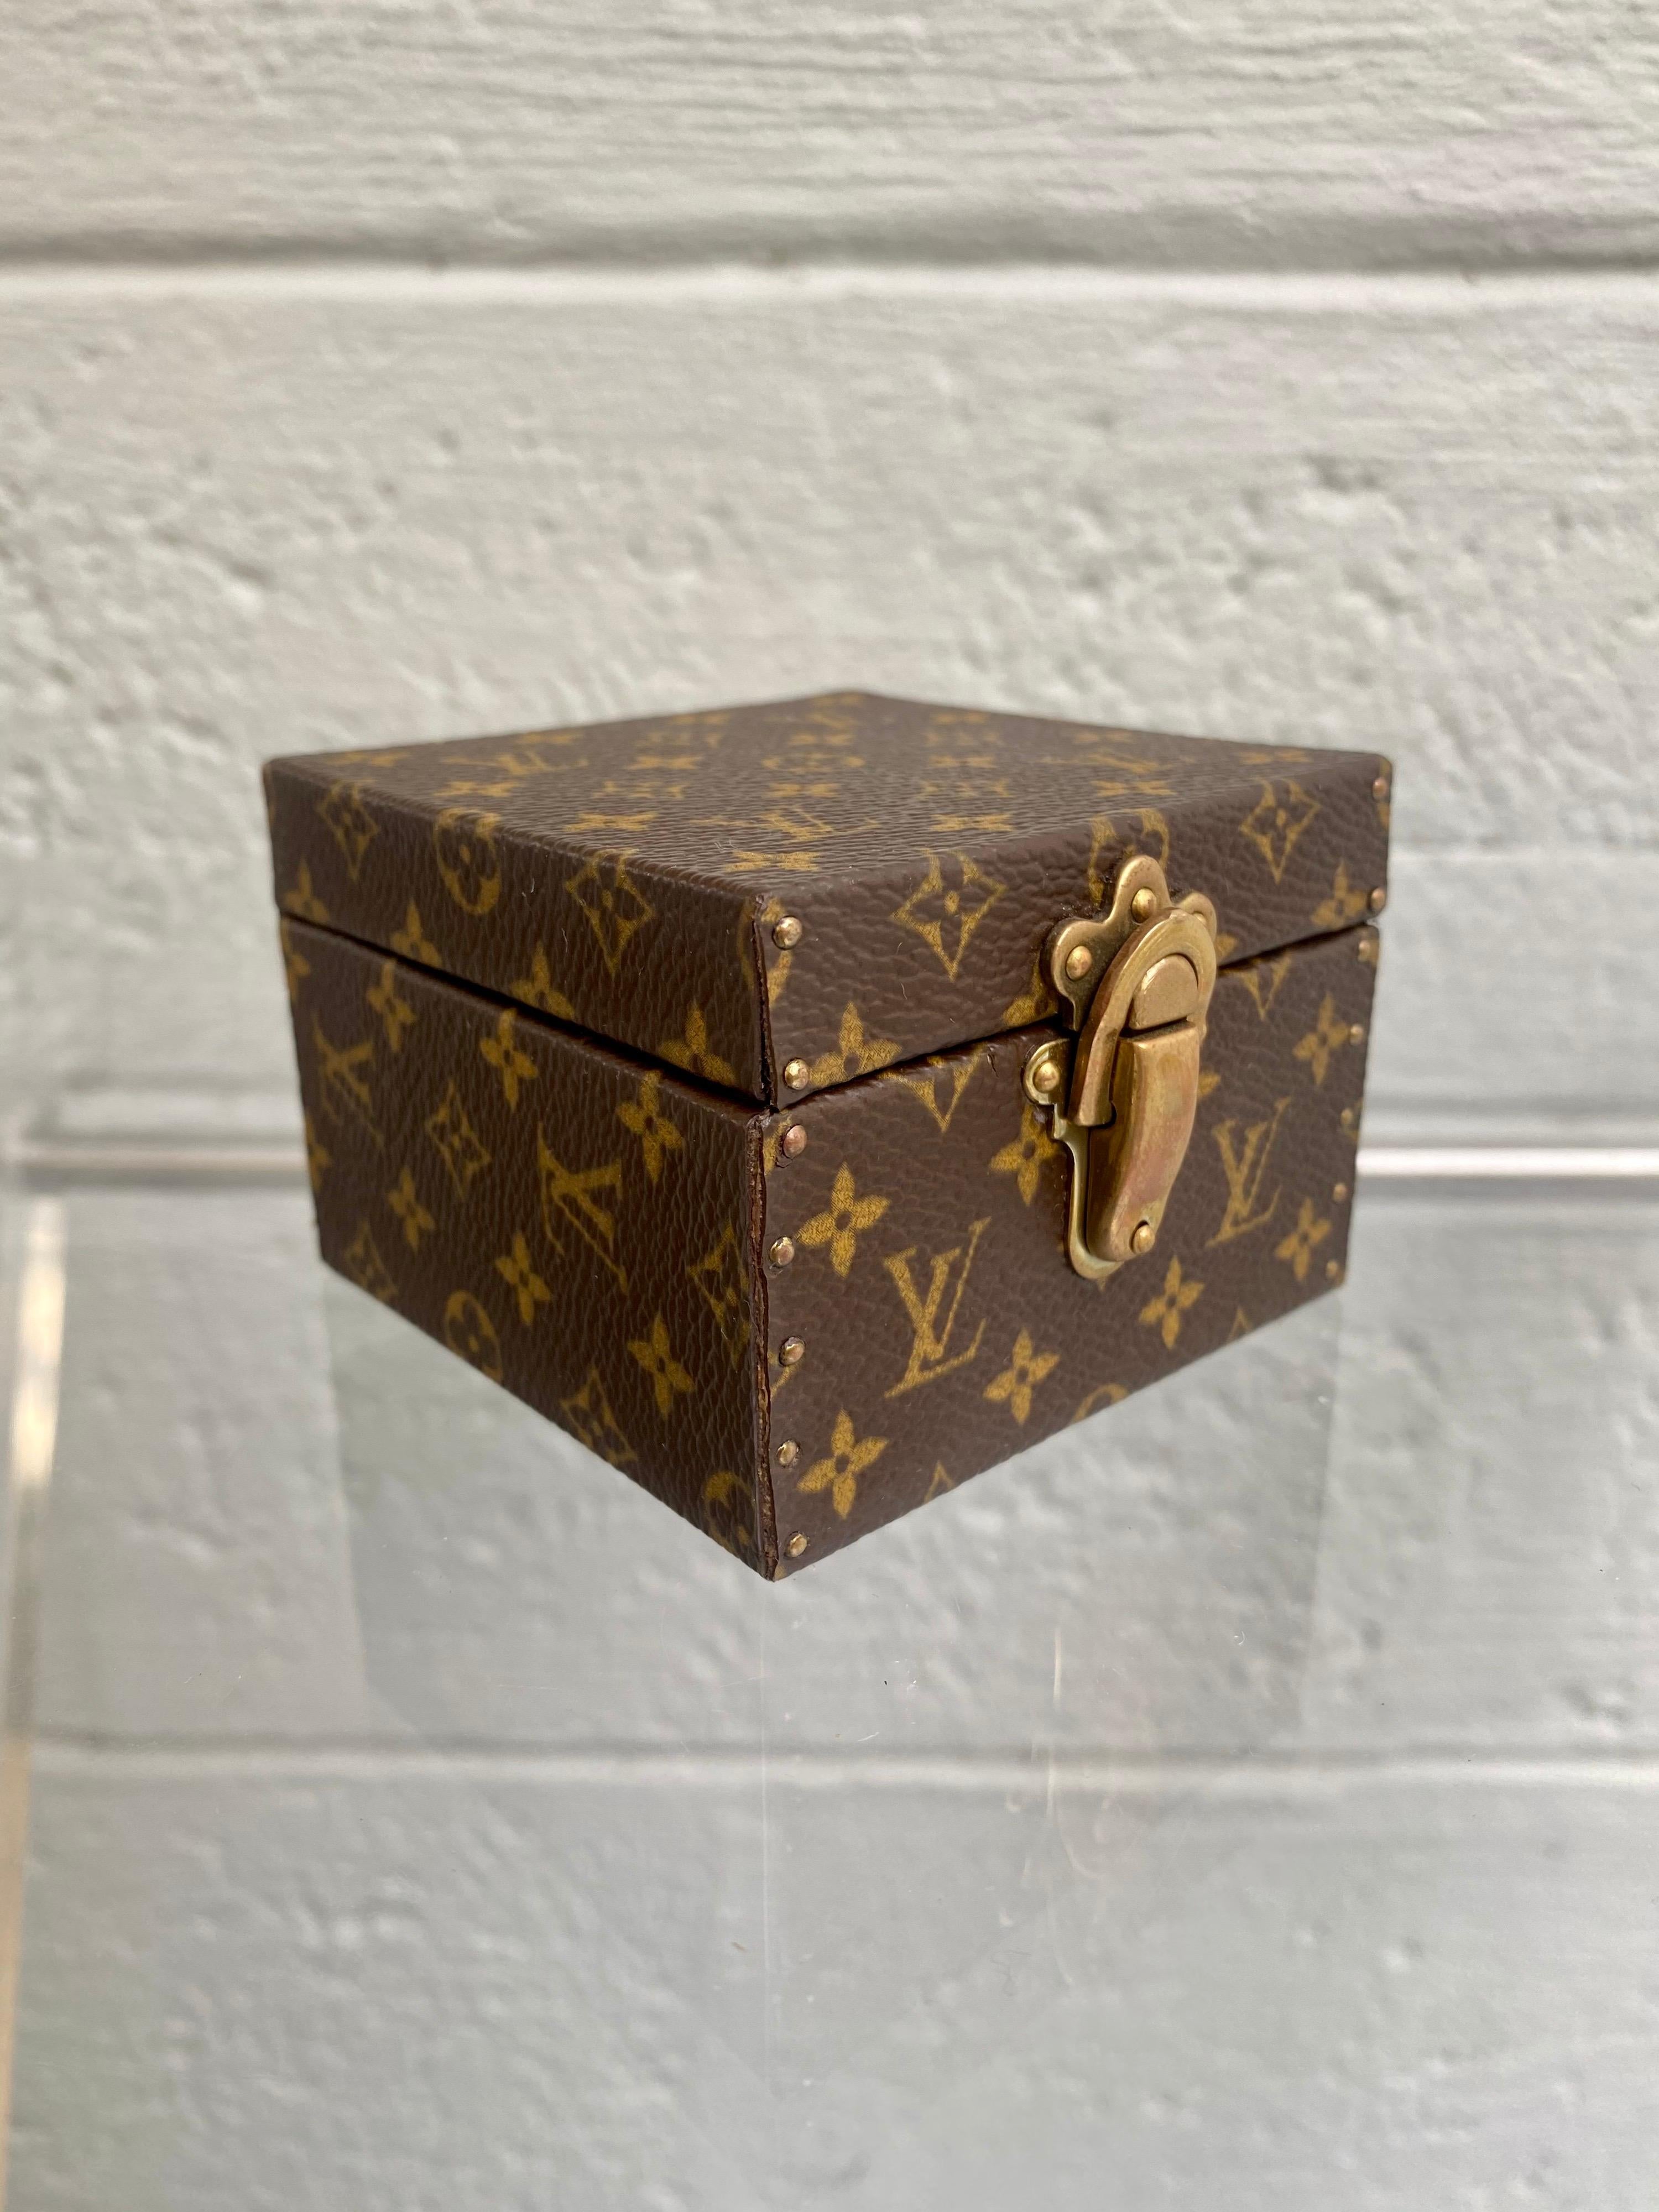 An exceptional min trunk case for romantic gifts. Classic Monogram designed for declarations of true love. Ideal for an engagement ring or other jewelry, this exquisite case proves that sometimes the container is as precious as what is inside.